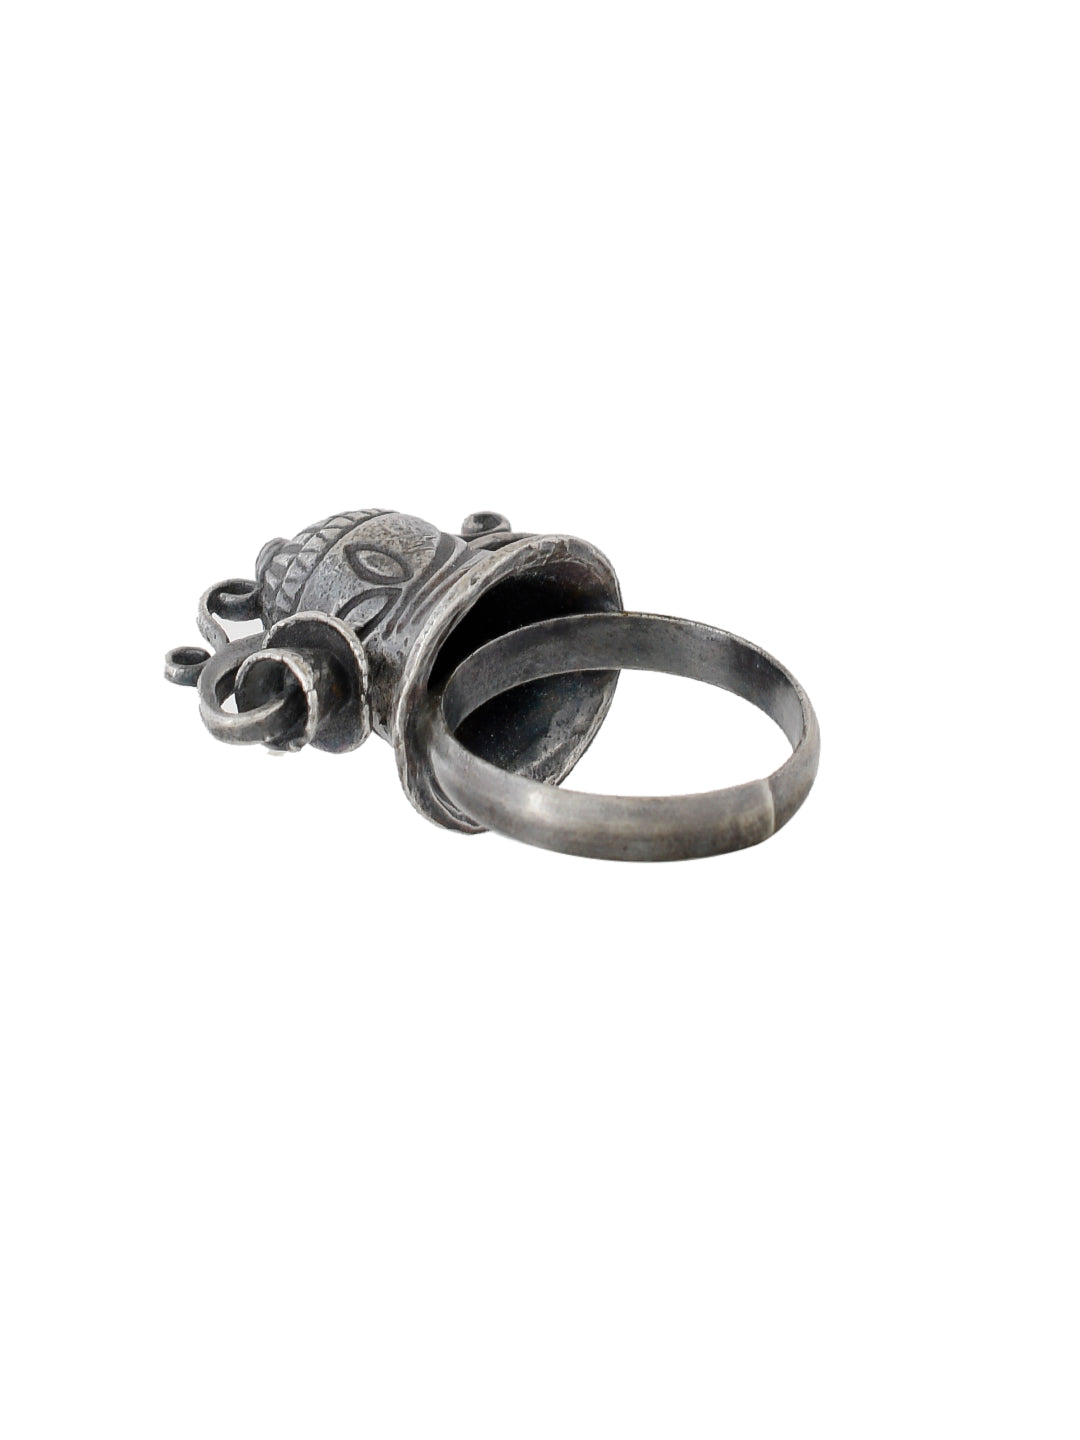 Fancy Oxidized Bell Silver Plated Rings For Women And Girls